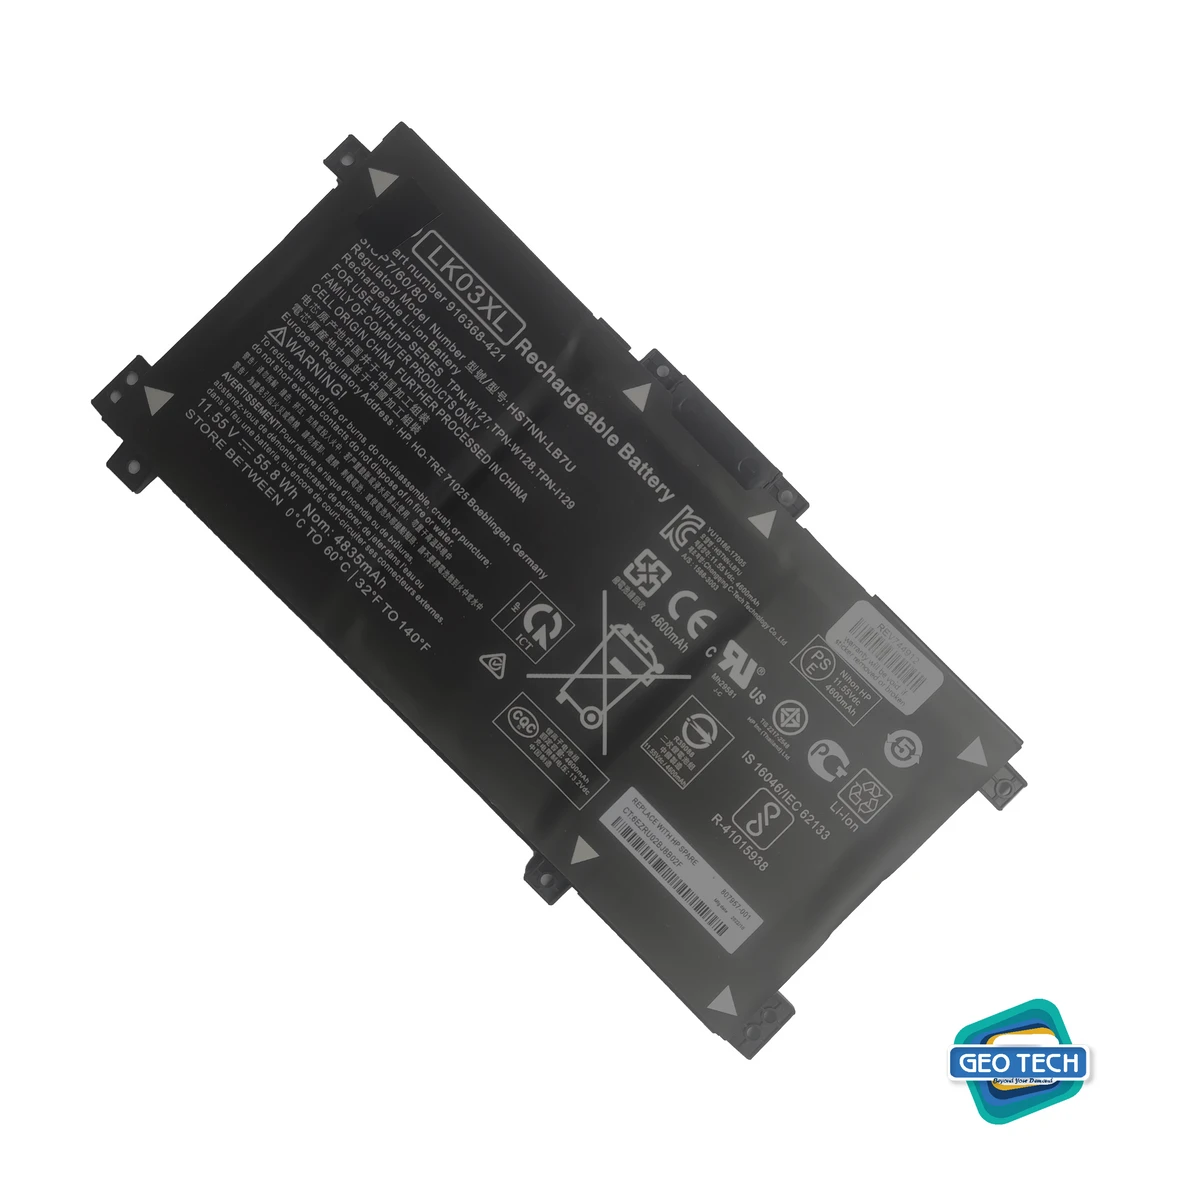 LK03XL Replacement Laptop Battery for Battery HP Envy X360 15-BP000 15M-BP000 15M-BQ1XX TPN-W127 TPN-W128 Series Notebook 916368-541 916814-855 HSTNN-UB71（11.55V 52.5Wh